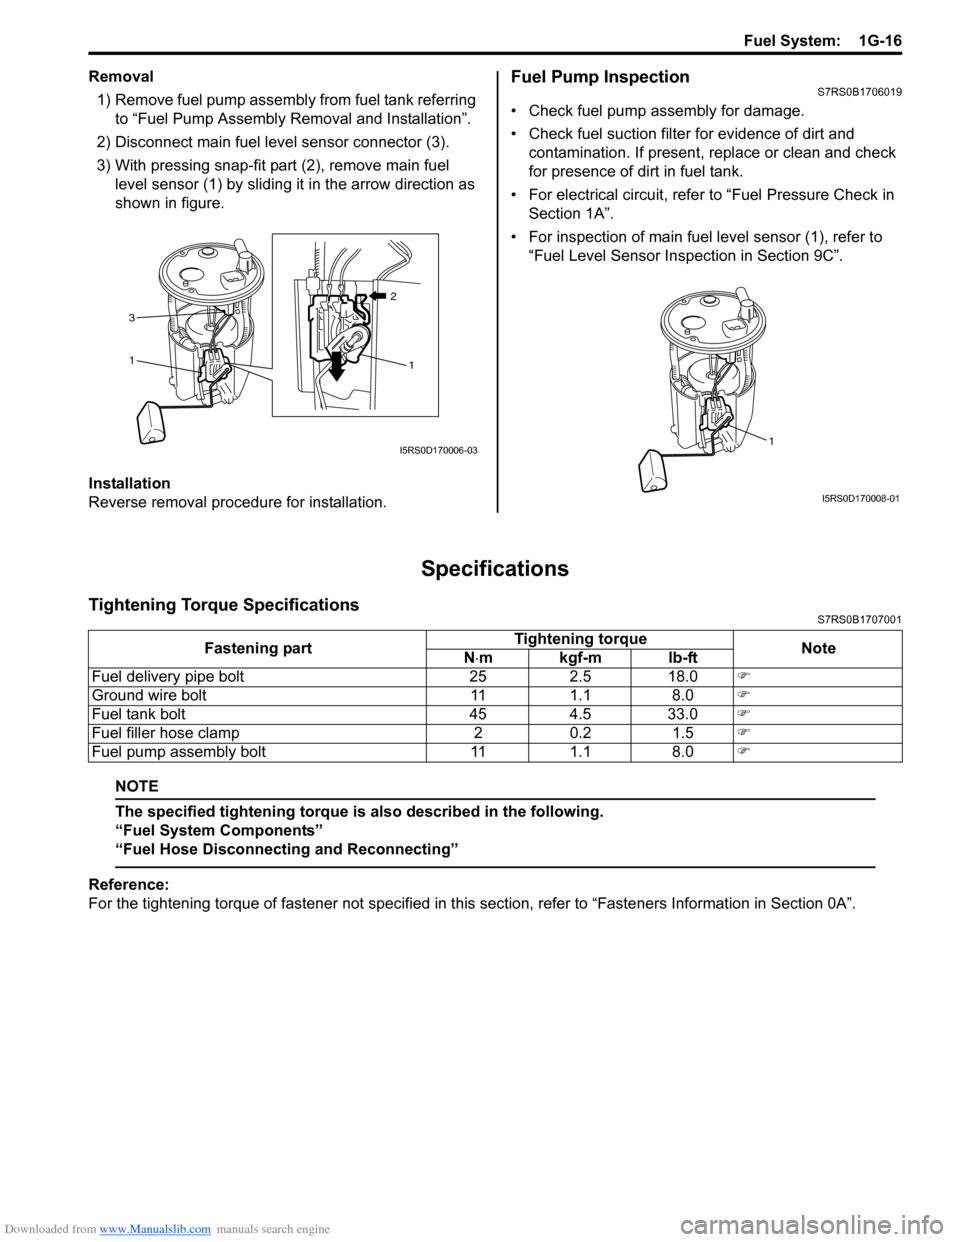 SUZUKI SWIFT 2006 2.G Service Service Manual Downloaded from www.Manualslib.com manuals search engine Fuel System:  1G-16
Removal1) Remove fuel pump assembly from fuel tank referring  to “Fuel Pump Assembly Removal and Installation”.
2) Disc